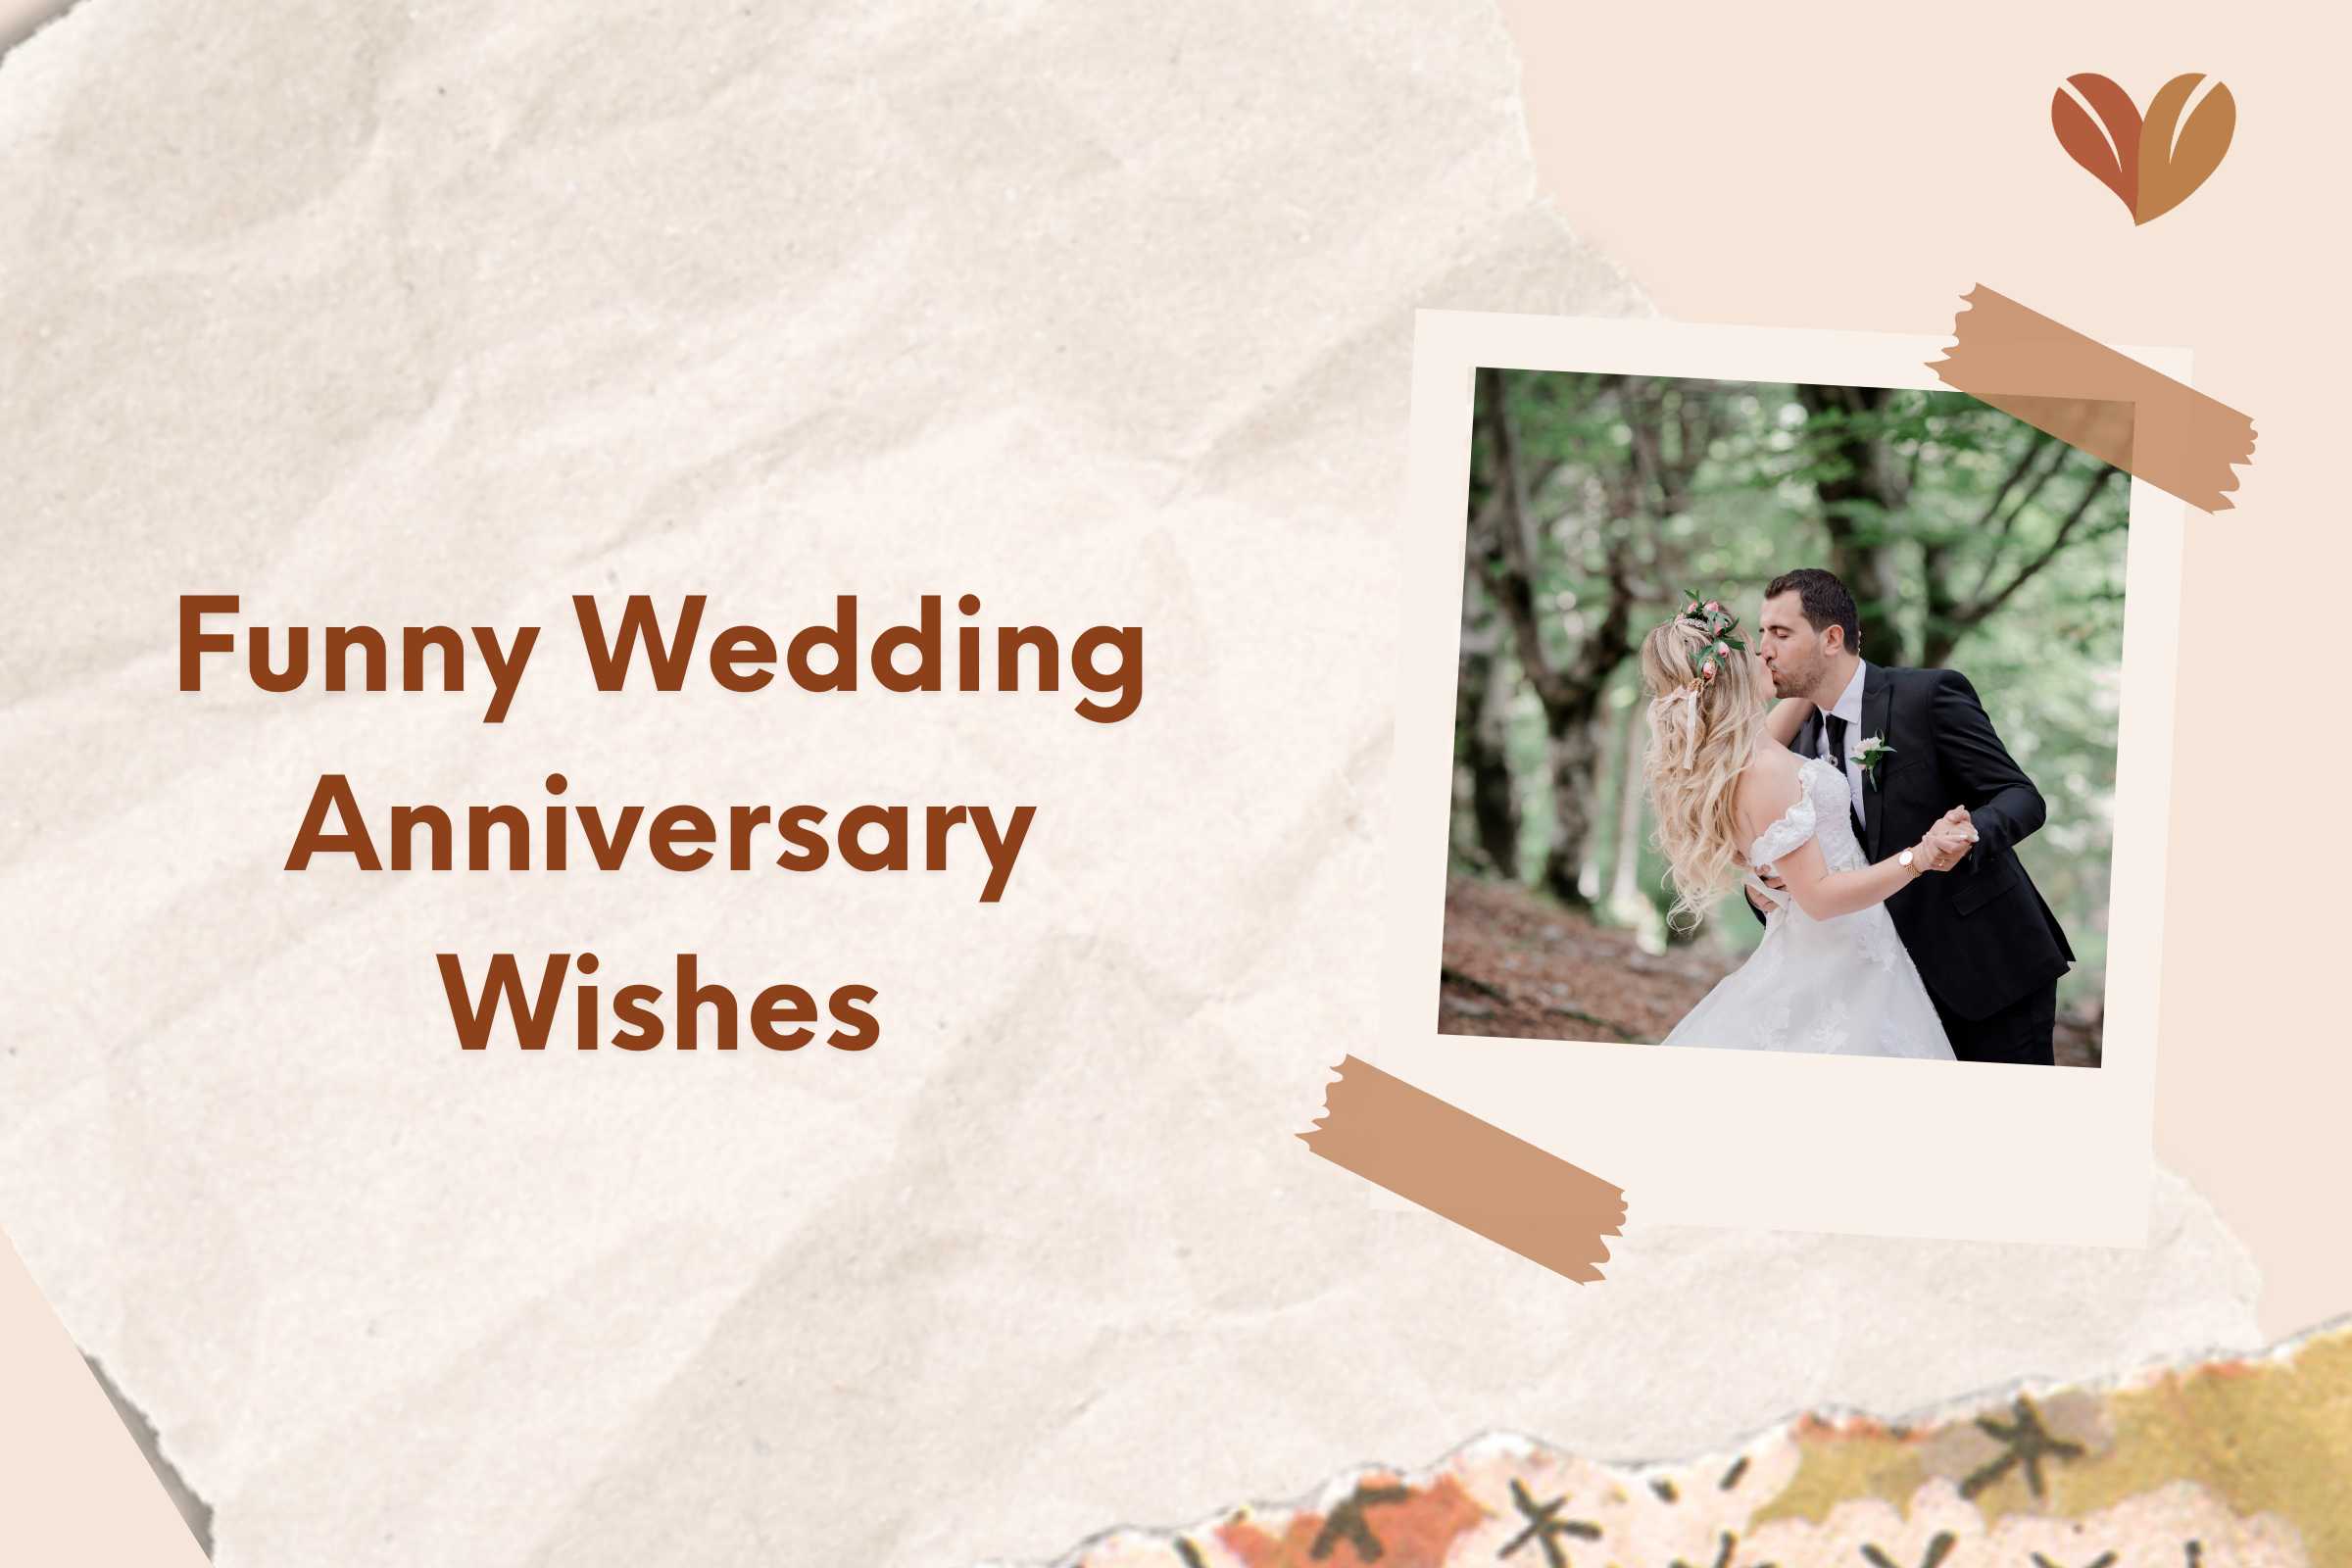 Funny wedding anniversary wishes for couple brighten up your celebration.